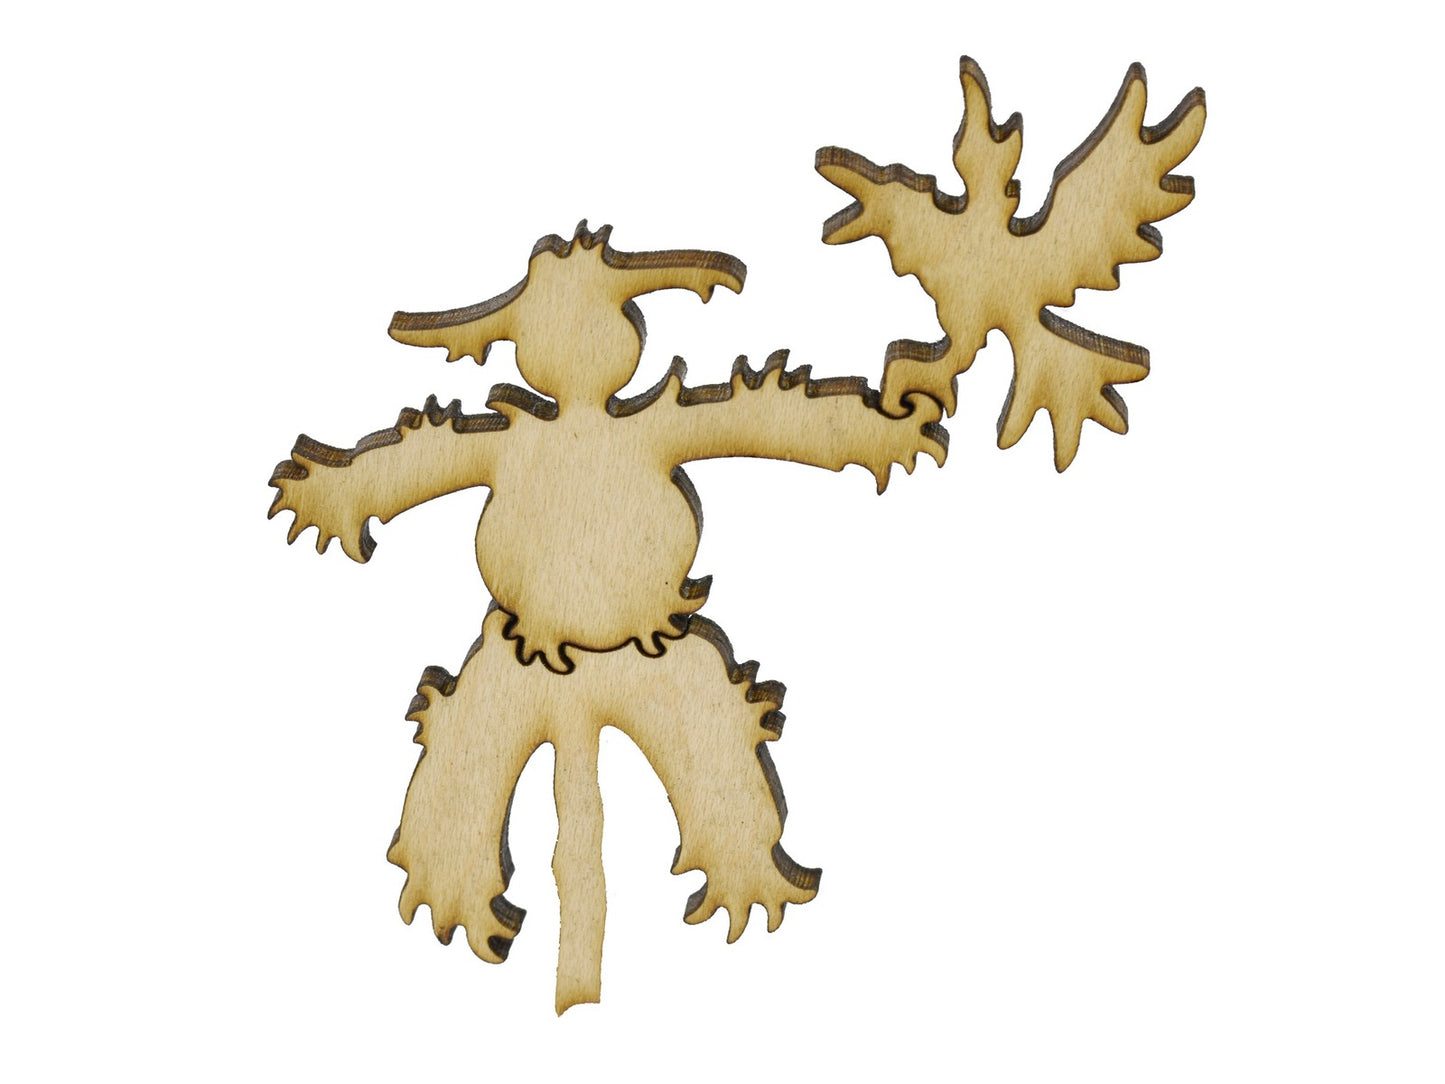 A closeup of pieces in the shape of a scarecrow.